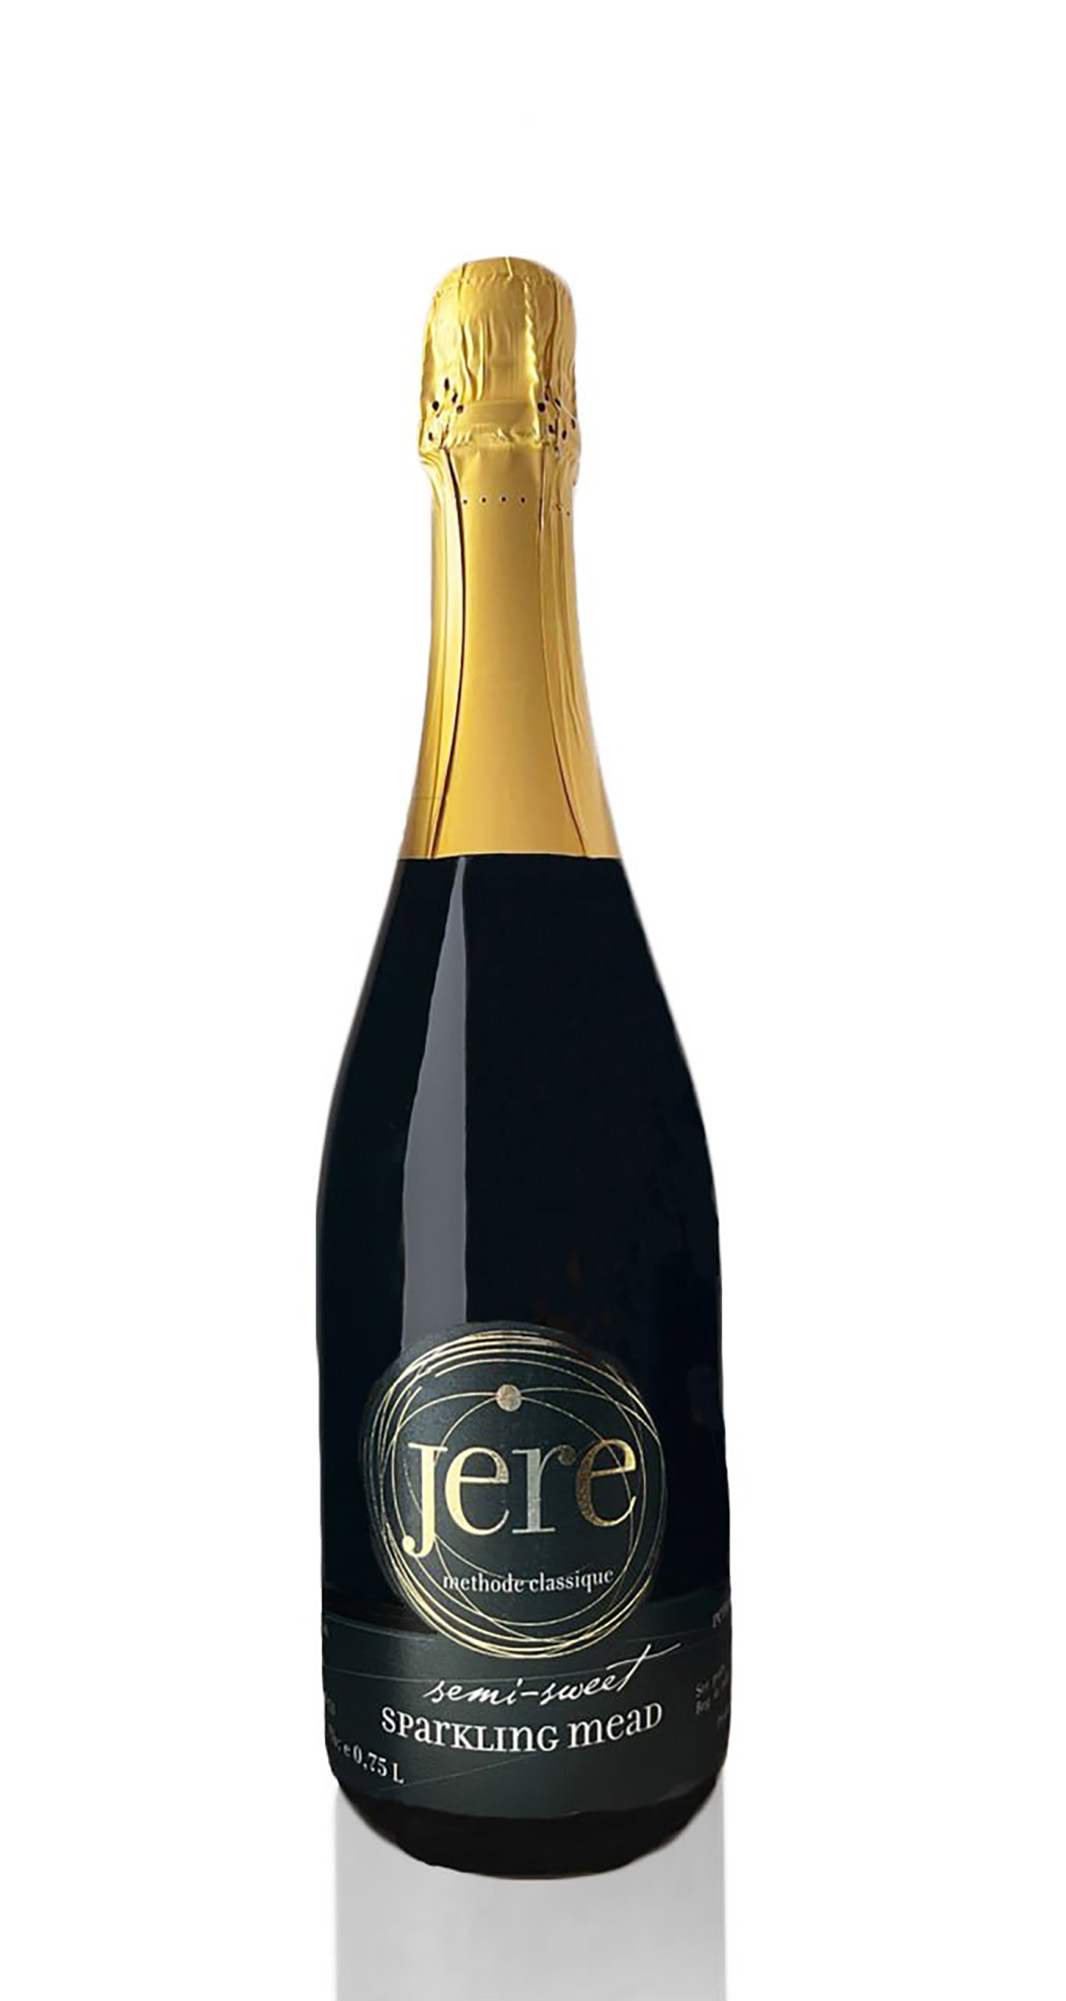 semisweet-sparkling-mead-jere